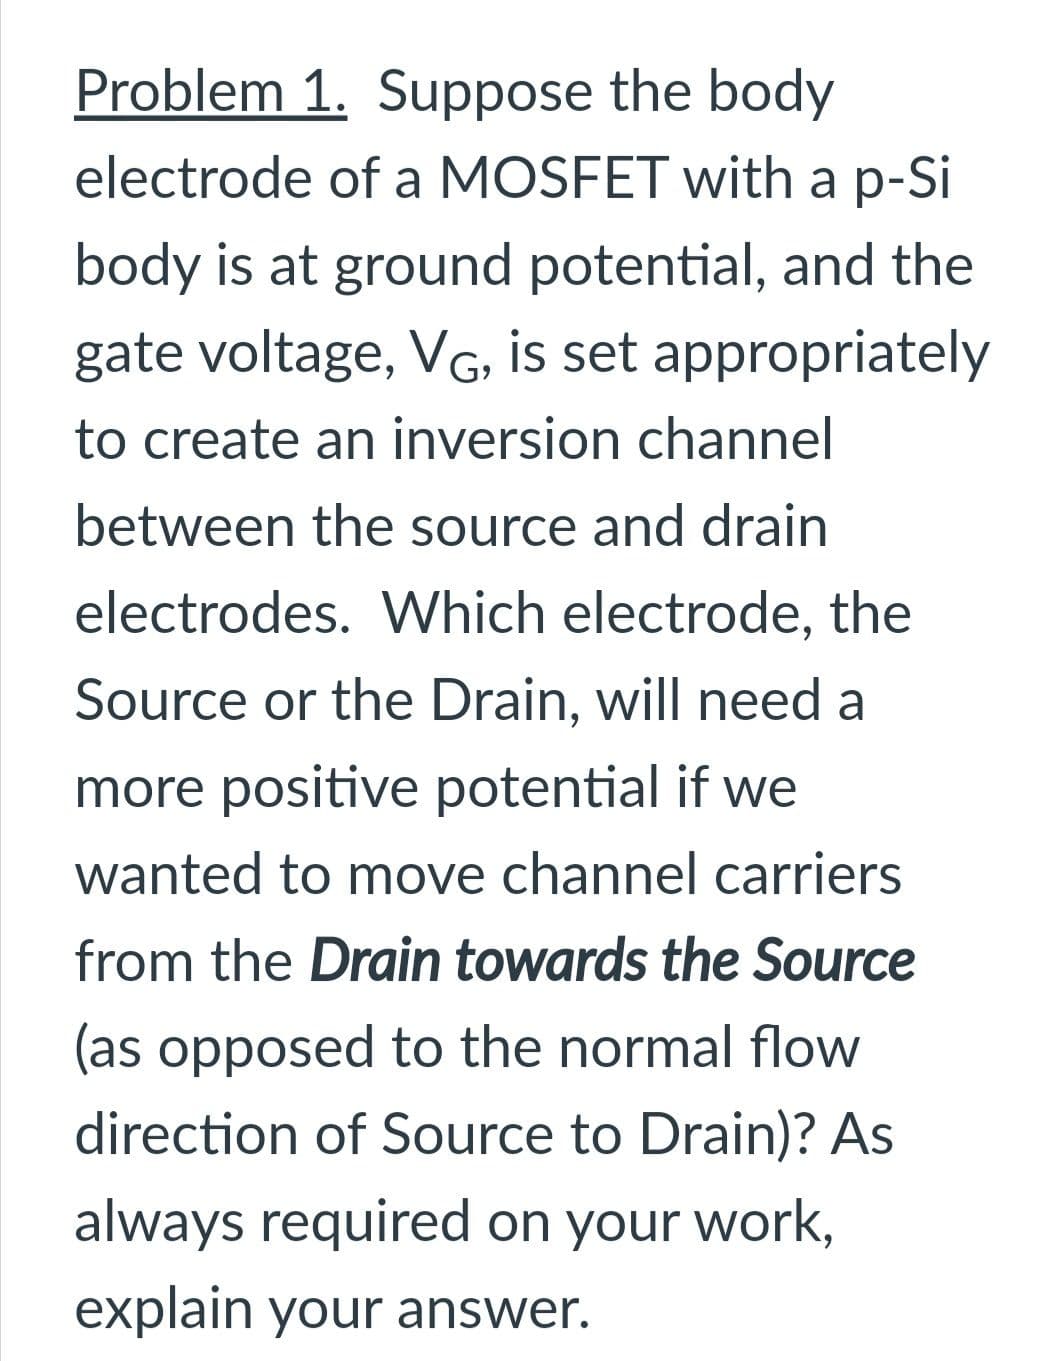 Problem 1. Suppose the body
electrode of a MOSFET with a p-Si
body is at ground potential, and the
gate voltage, VG, is set appropriately
to create an inversion channel
between the source and drain
electrodes. Which electrode, the
Source or the Drain, will need a
more positive potential if we
wanted to move channel carriers
from the Drain towards the Source
(as opposed to the normal flow
direction of Source to Drain)? As
always required on your work,
explain your answer.
